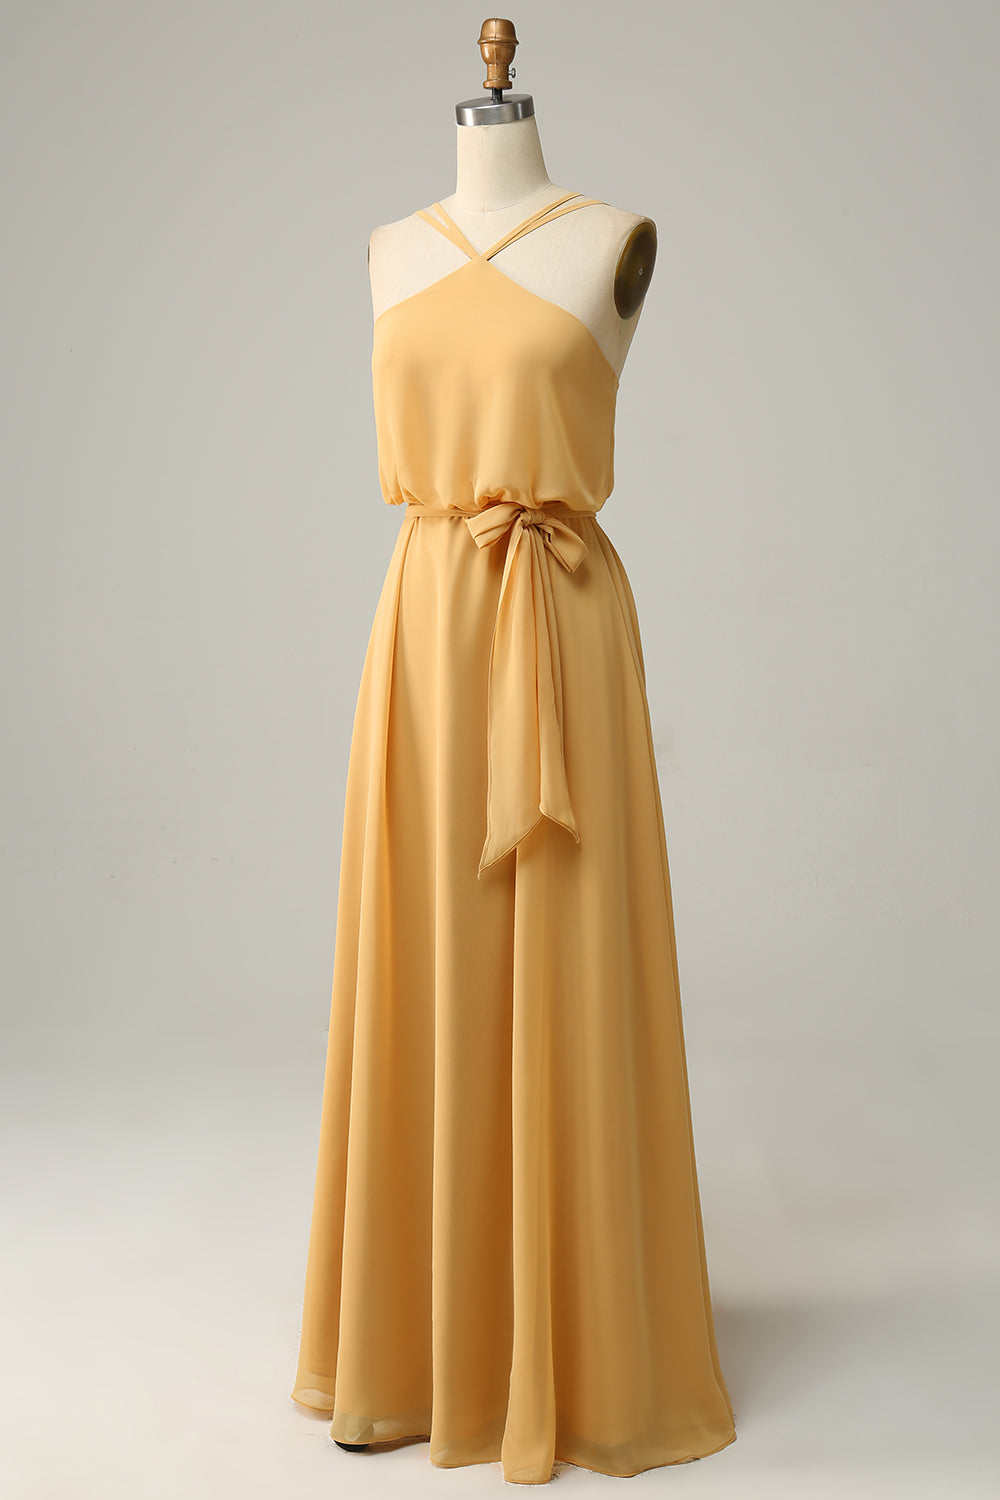 Yellow A Line Halter Long Bridesmaid Dress with Bowknot